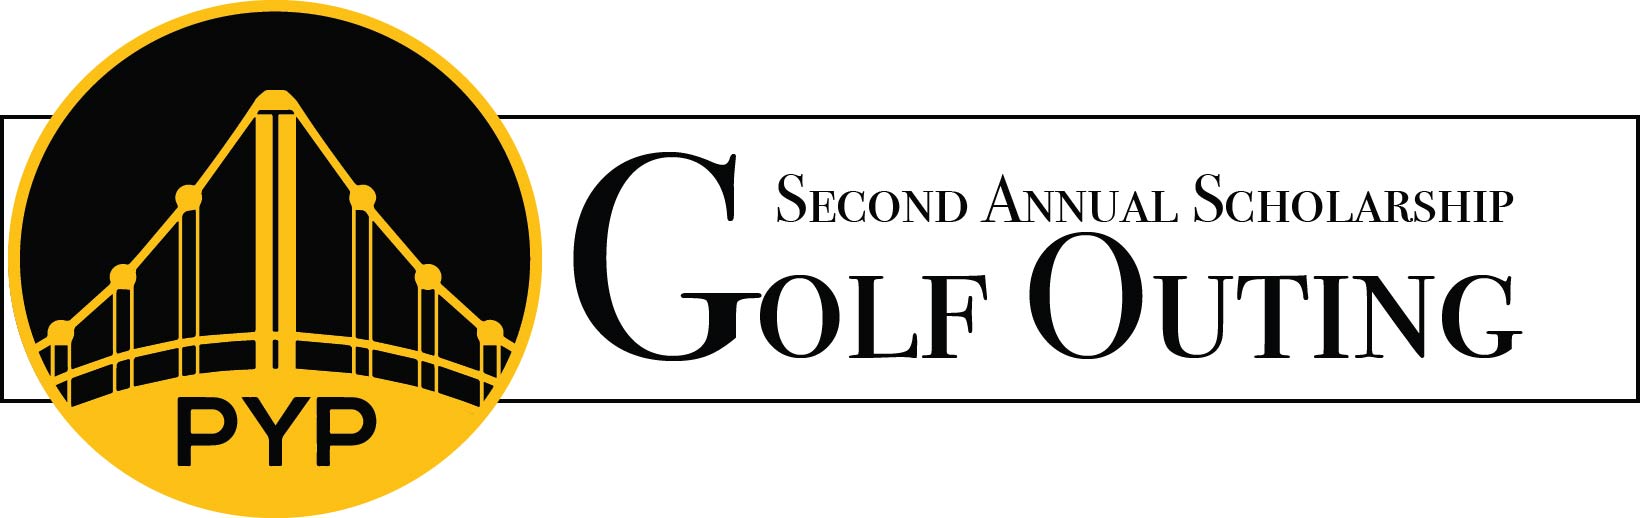 Second Annual Scholarship Golf Outing